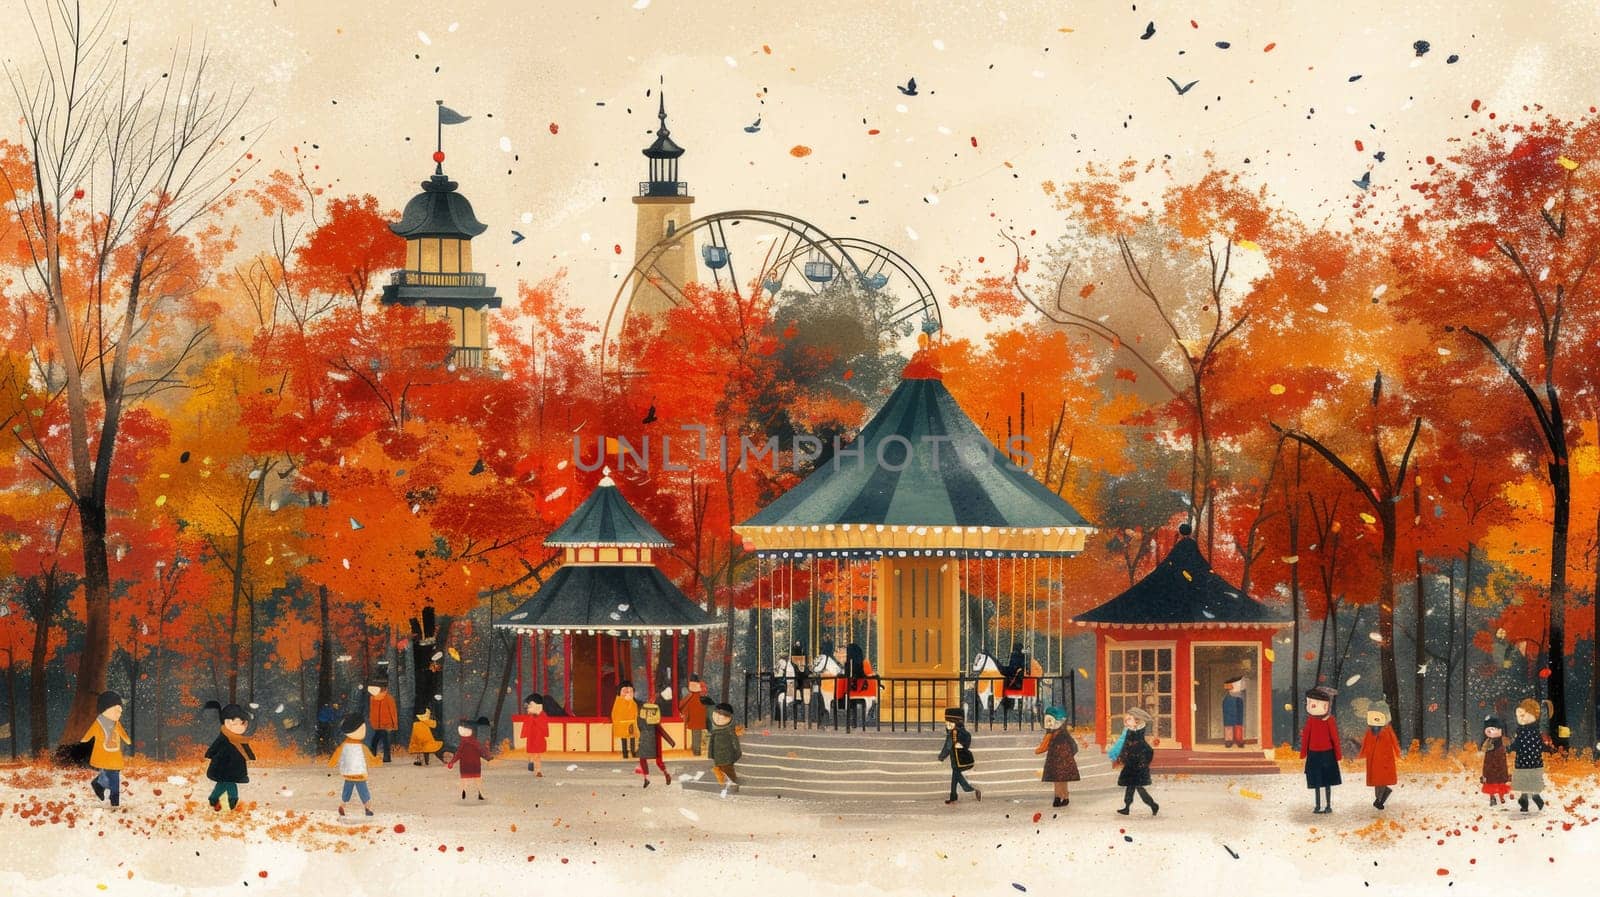 A painting of a park with people and trees in the fall